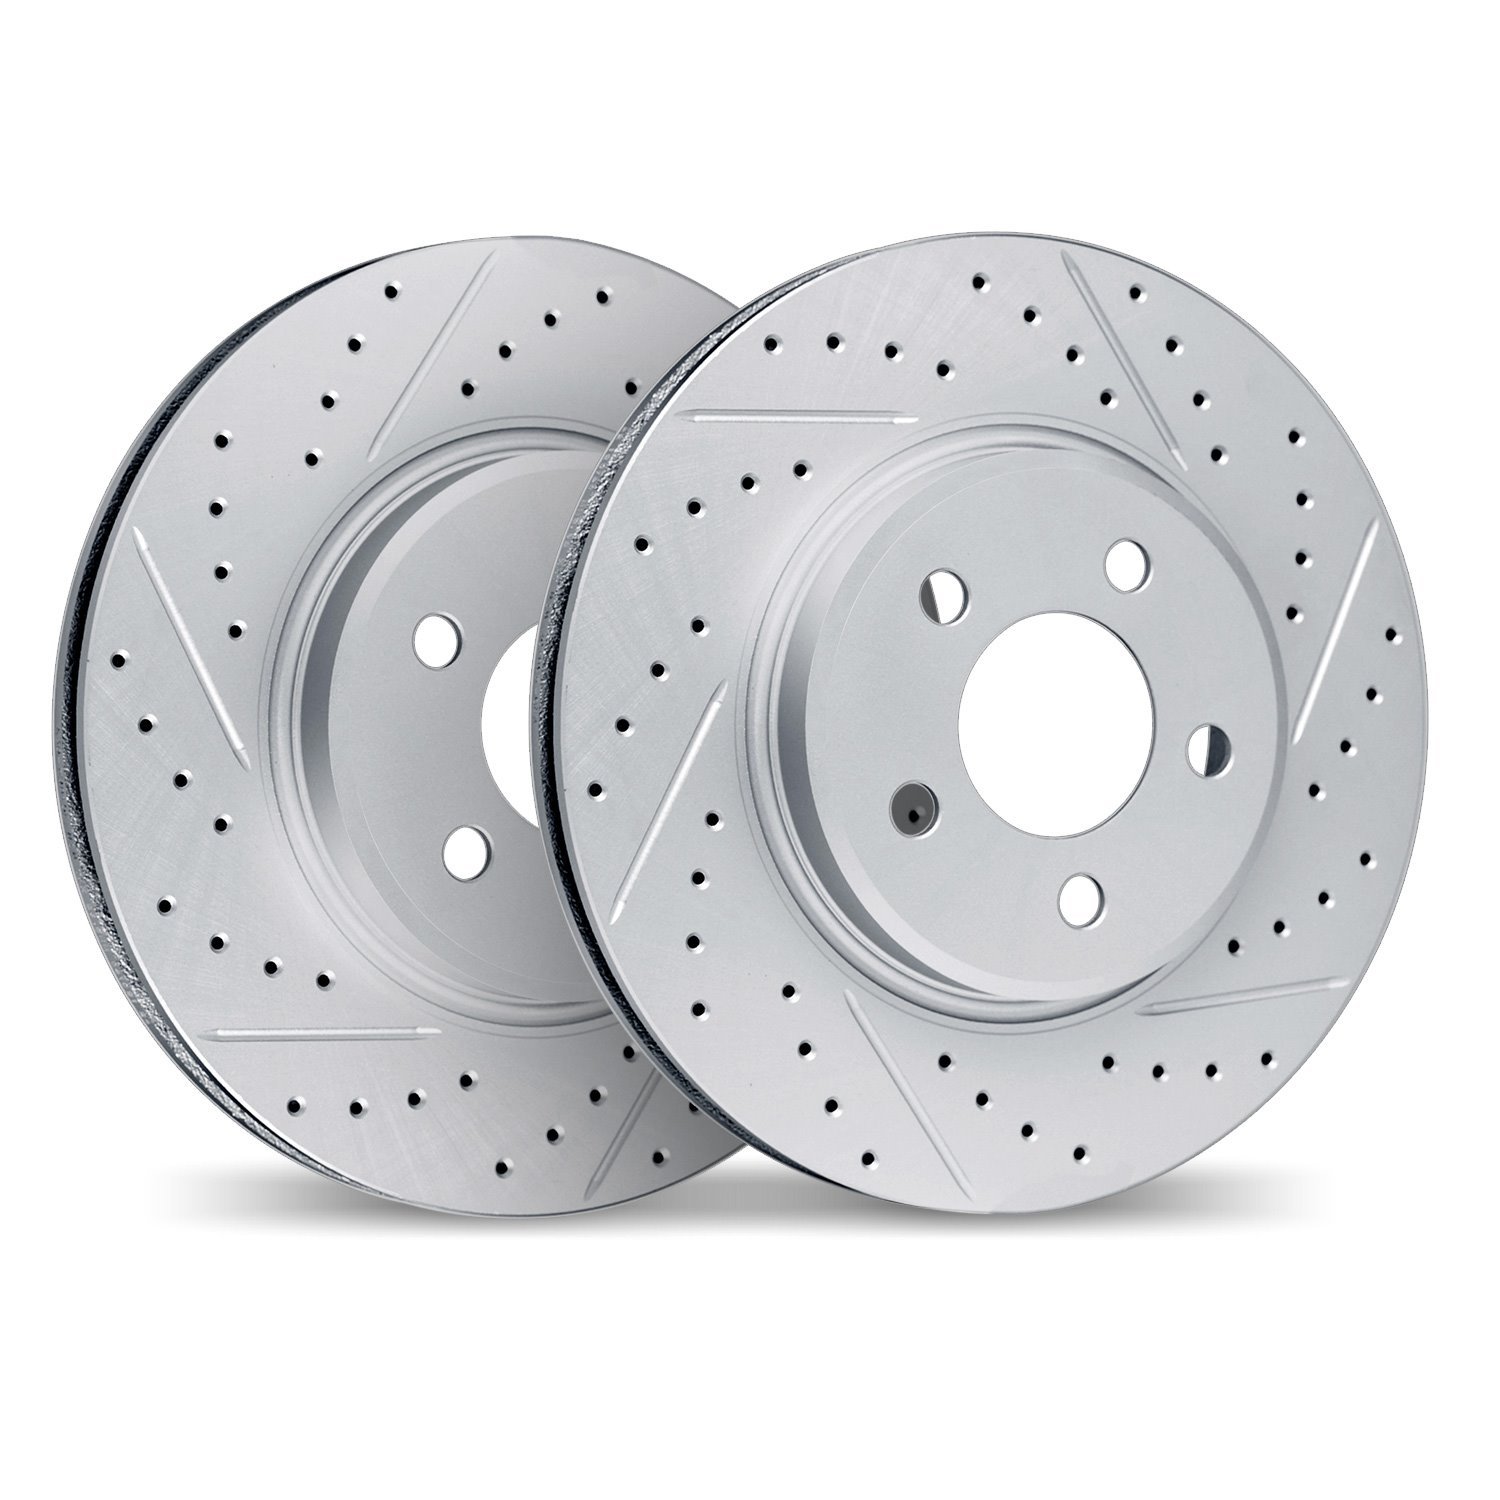 2002-75009 Geoperformance Drilled/Slotted Brake Rotors, 1995-2000 Lexus/Toyota/Scion, Position: Front